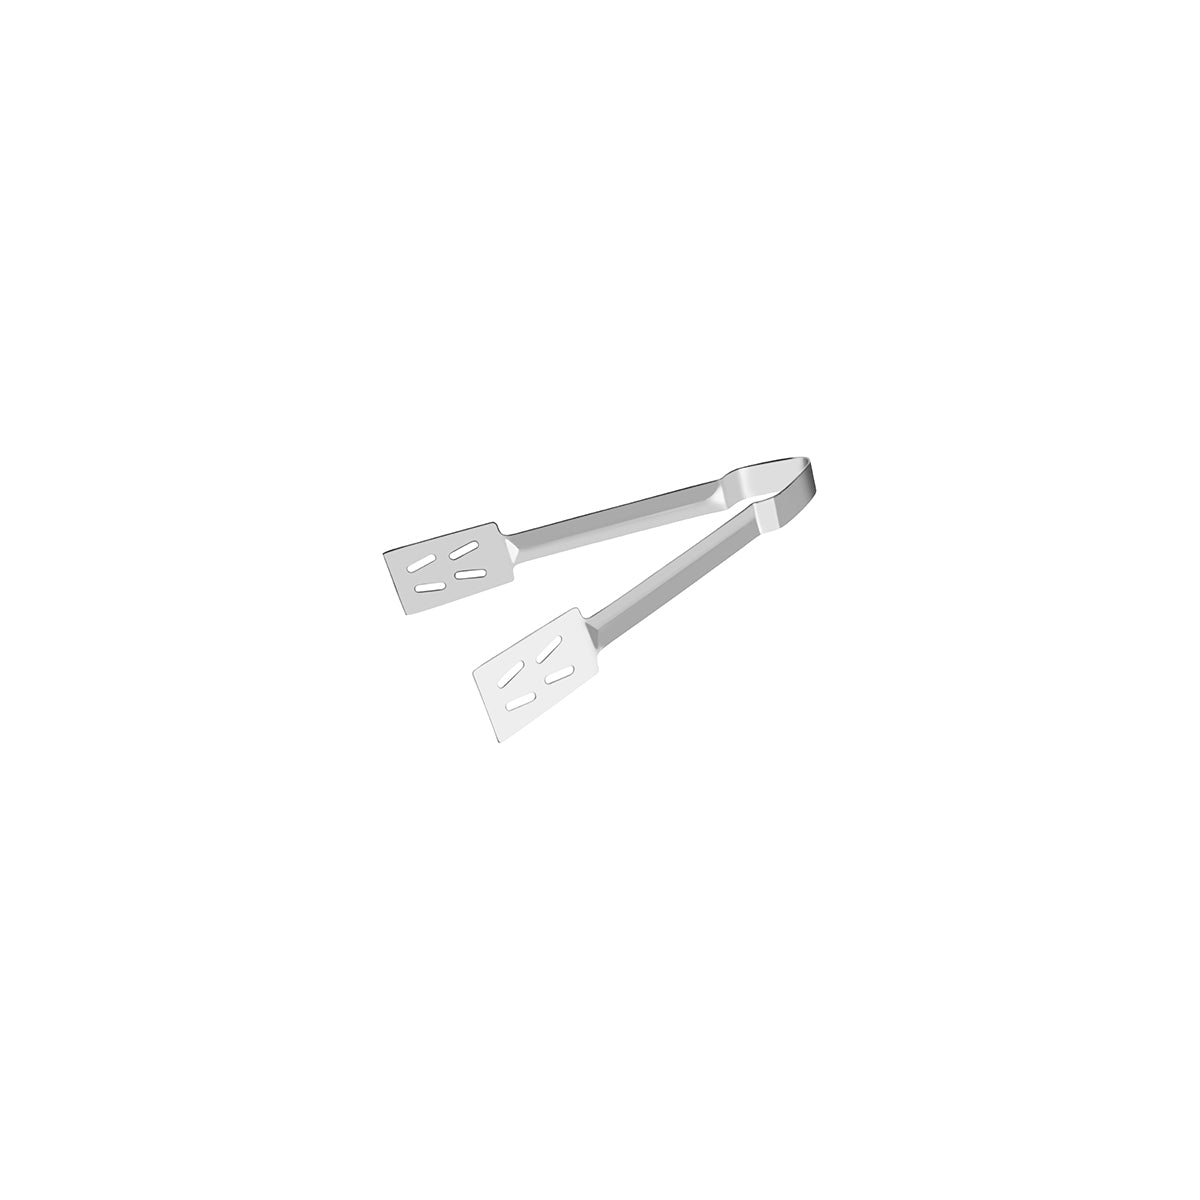 70213 Chef Inox Serving Tong Stainless Steel 180mm Tomkin Australia Hospitality Supplies